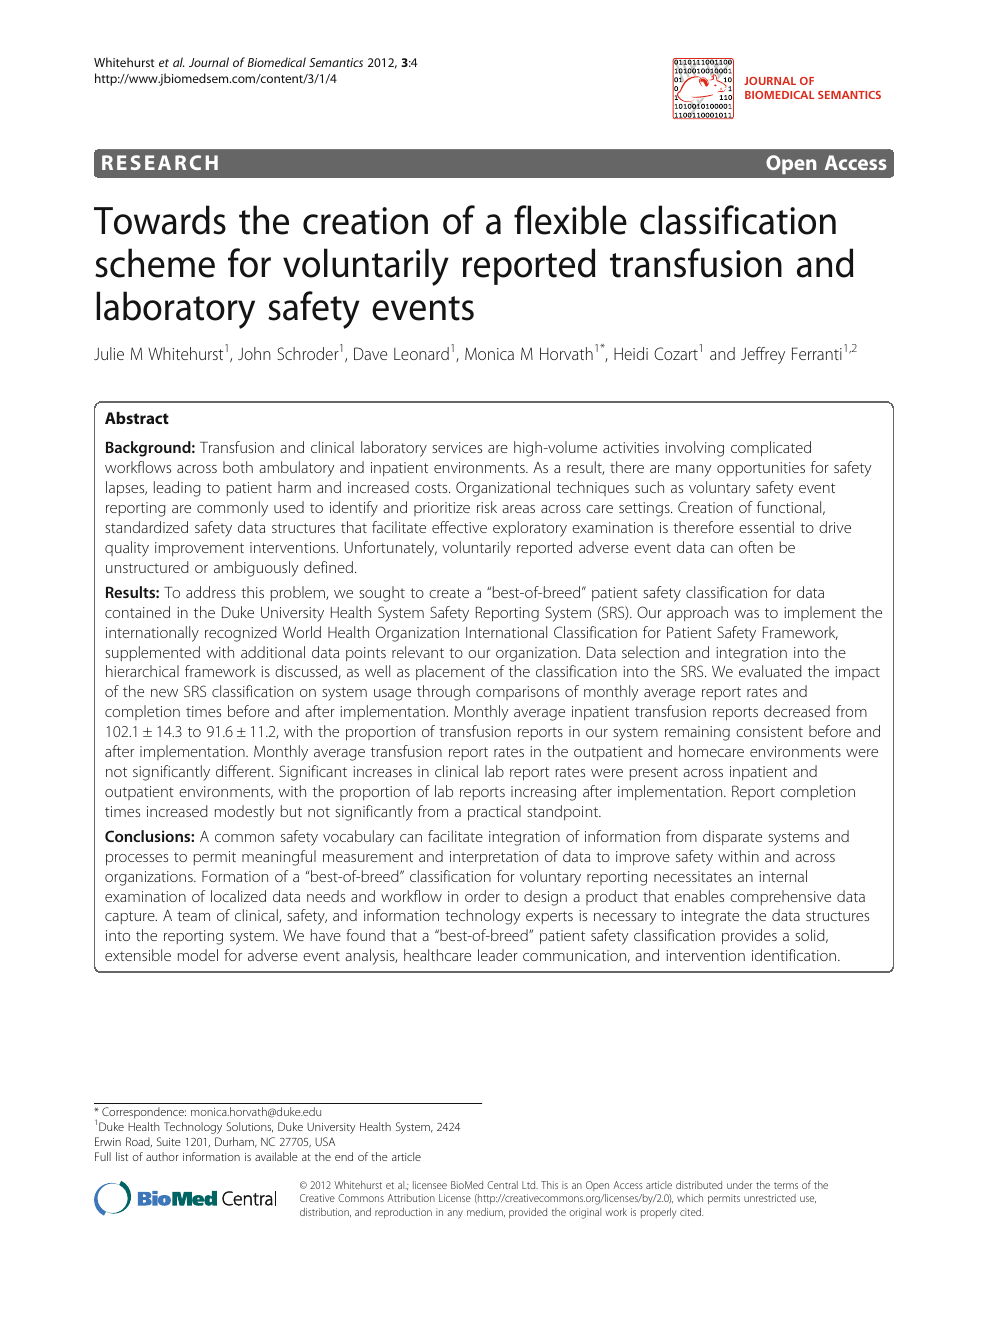 Towards The Creation Of A Flexible Classification Scheme For